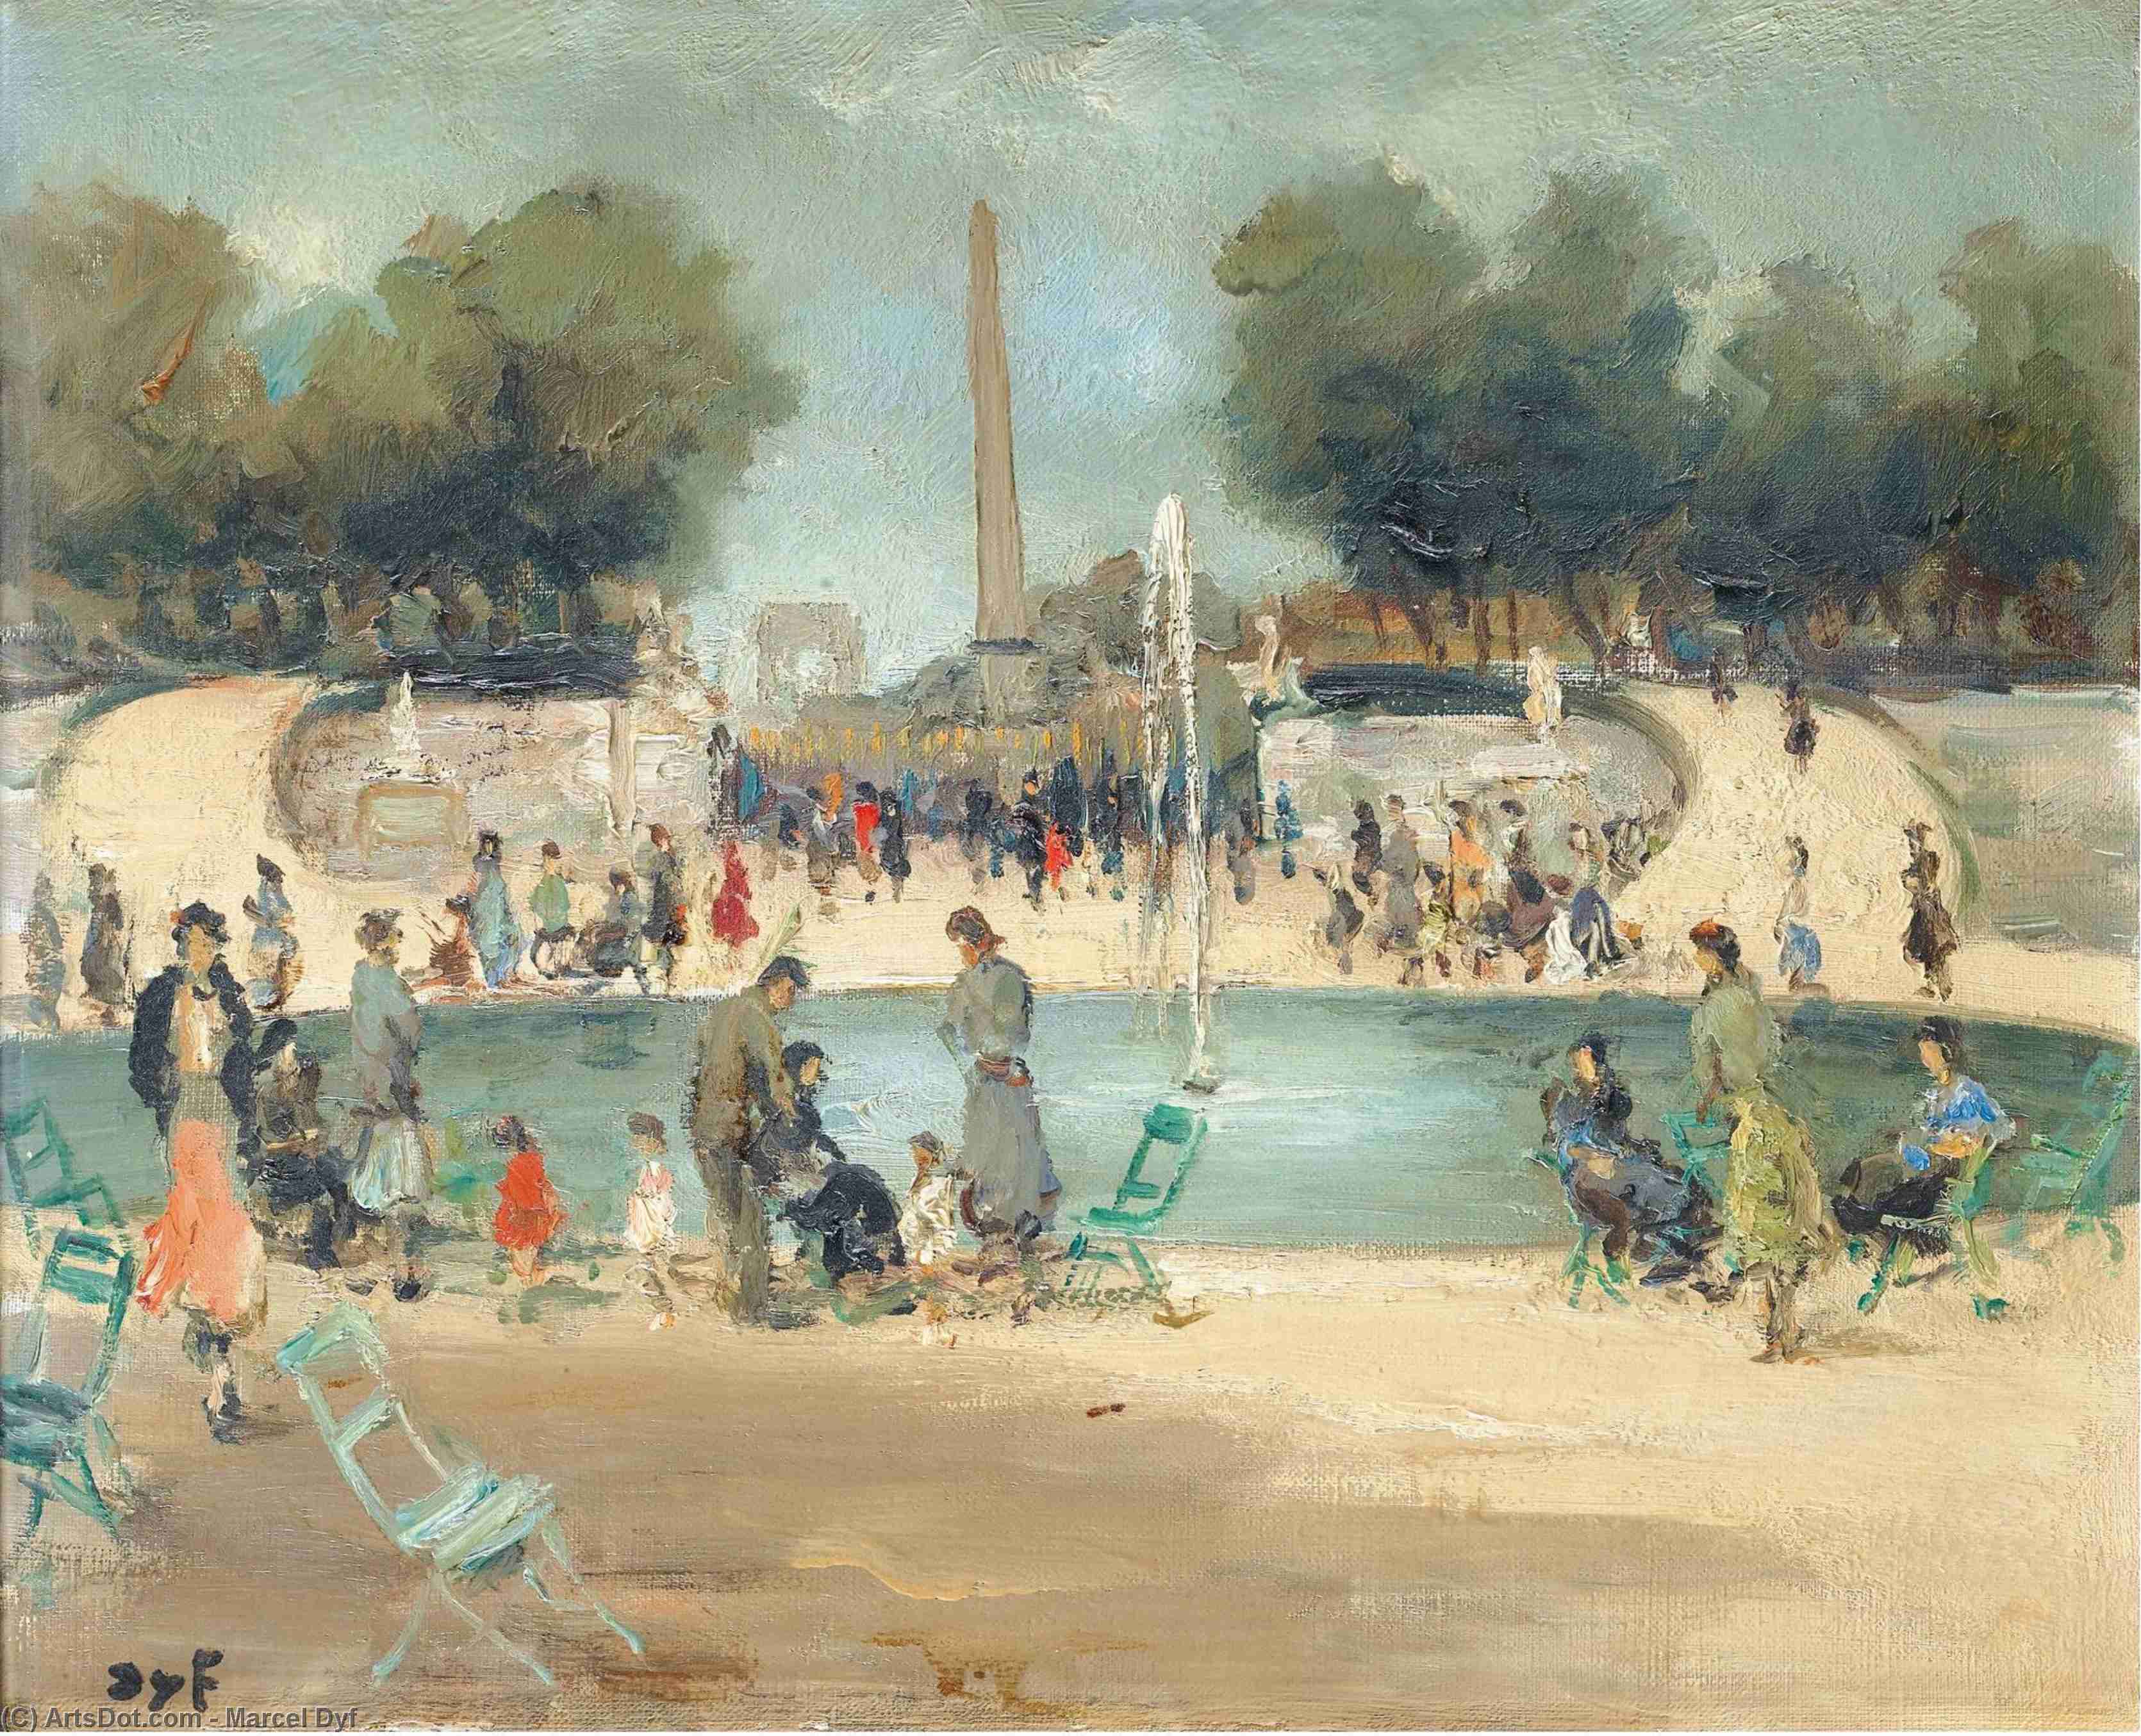 Order Oil Painting Replica The Garden of Tuileries by Marcel Dyf (Inspired By) (1899-1985, France) | ArtsDot.com